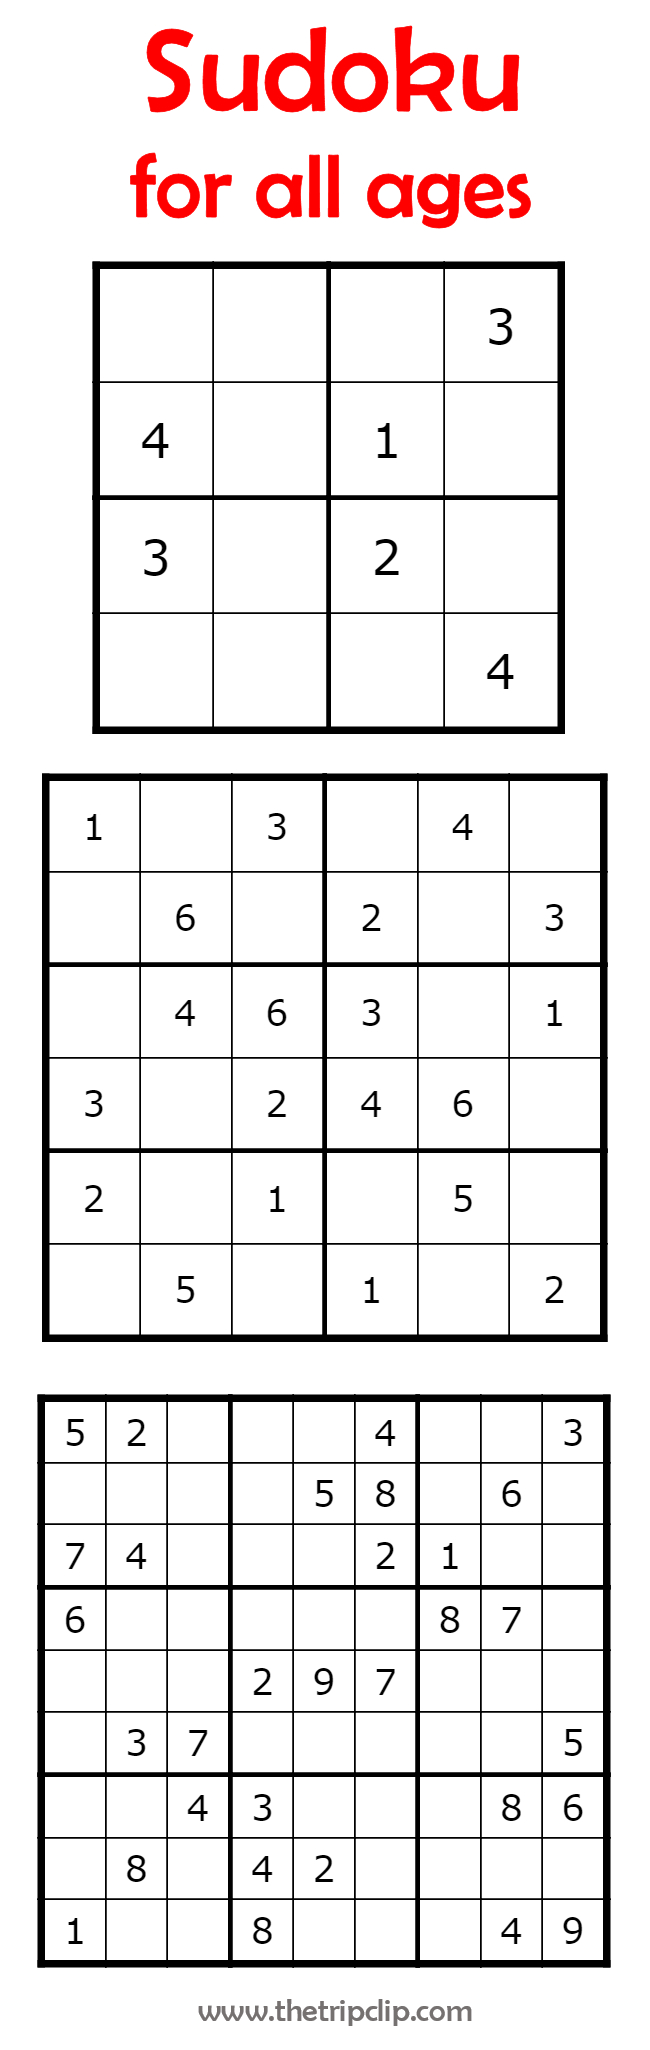 Sudoku For All Ages Plus Lots Of Other Printable Activities For Kids - Printable Kenken Puzzles 9X9